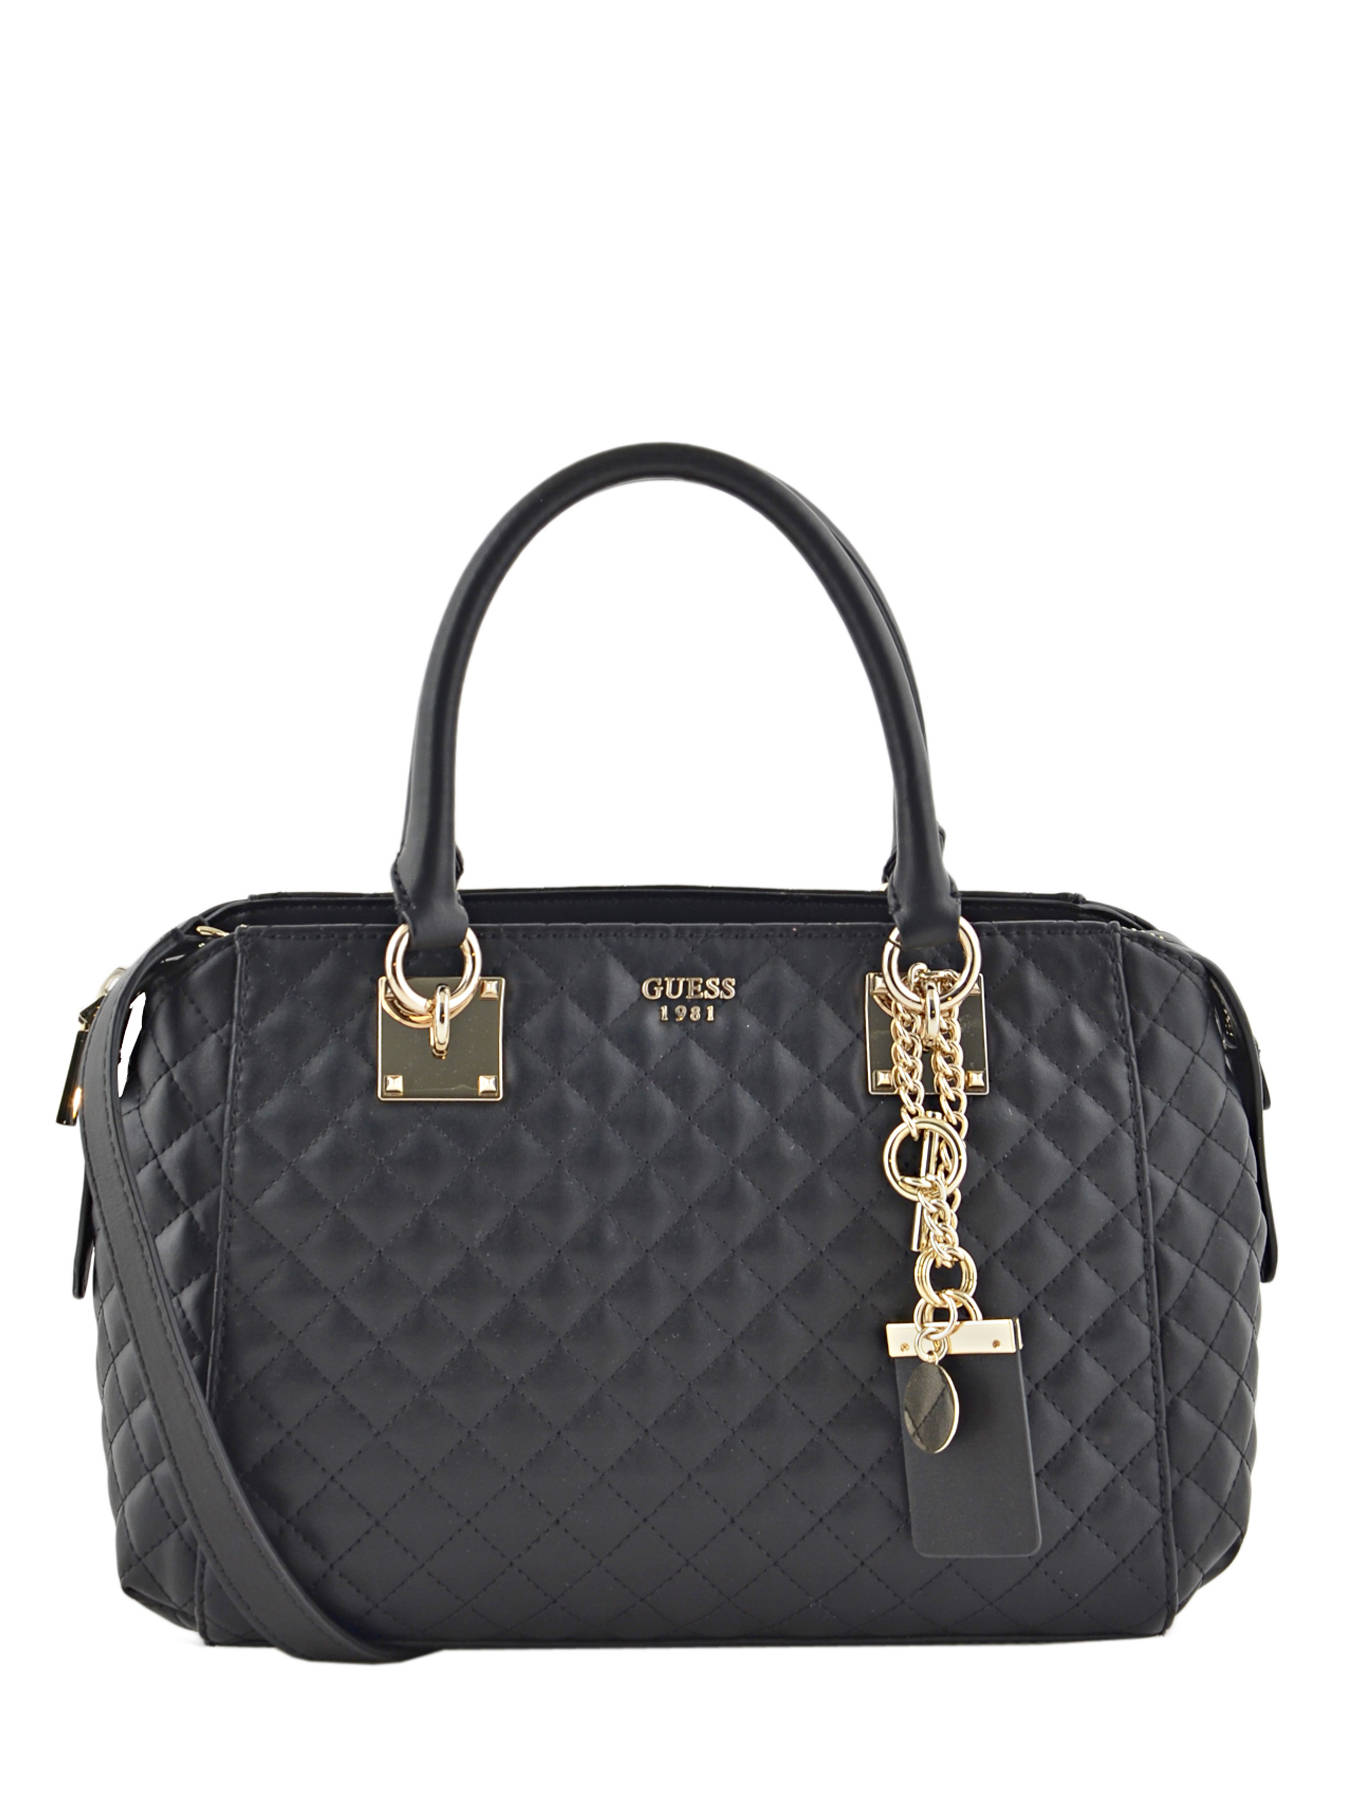 Guess Bag Rochelle - Best prices